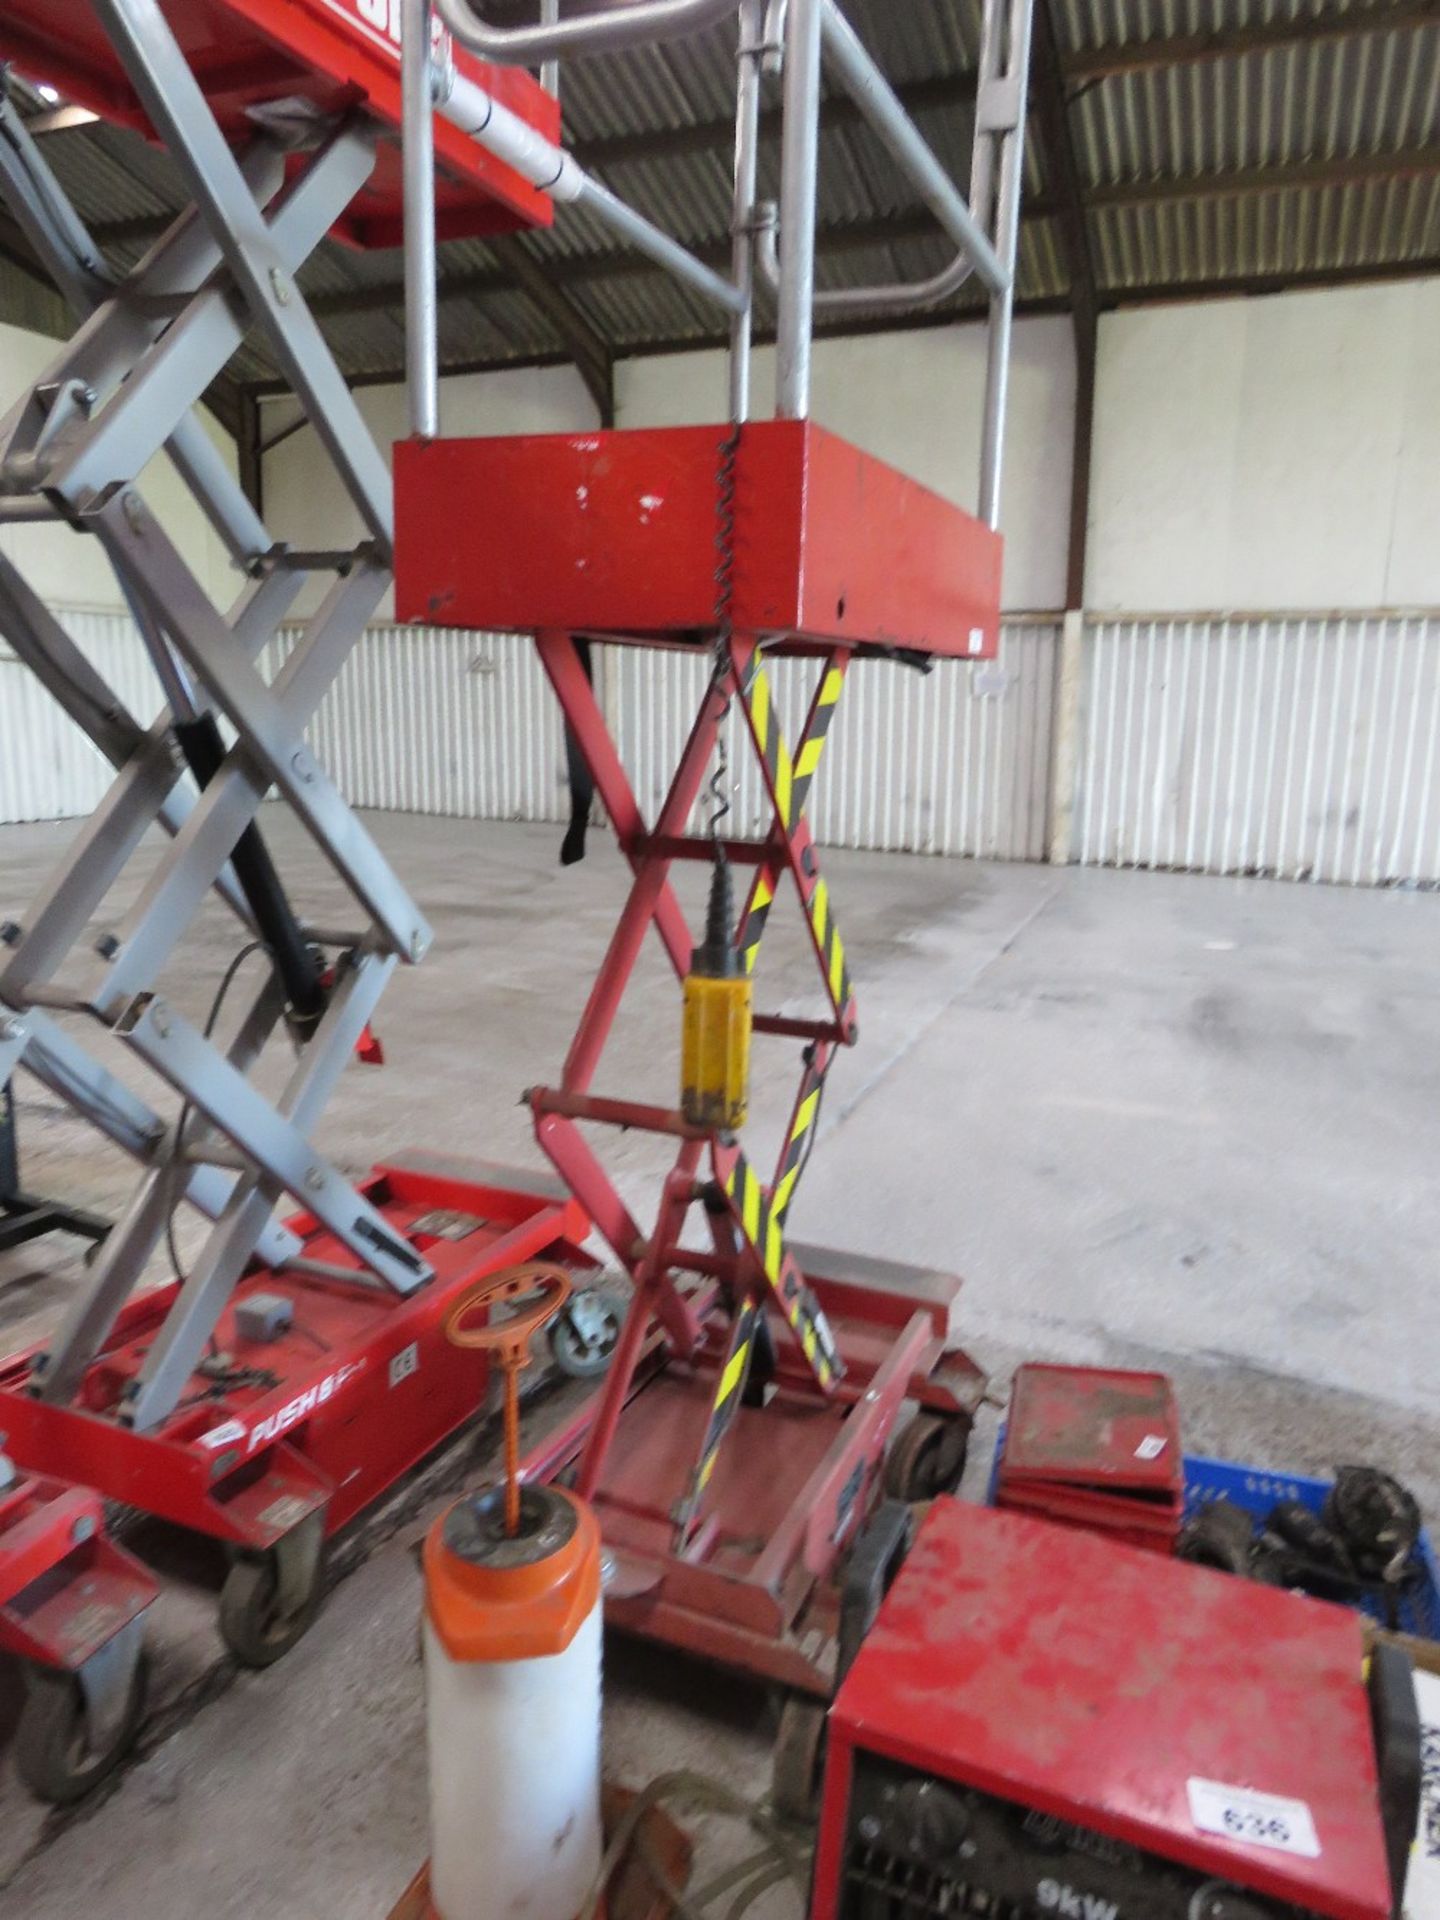 POPUP SCISSOR LIFT ACCESS UNIT, MAXIMUM WORKING HEIGHT . WHEN TESTED WAS SEEN TO LIFT AND LOWER. - Image 3 of 5